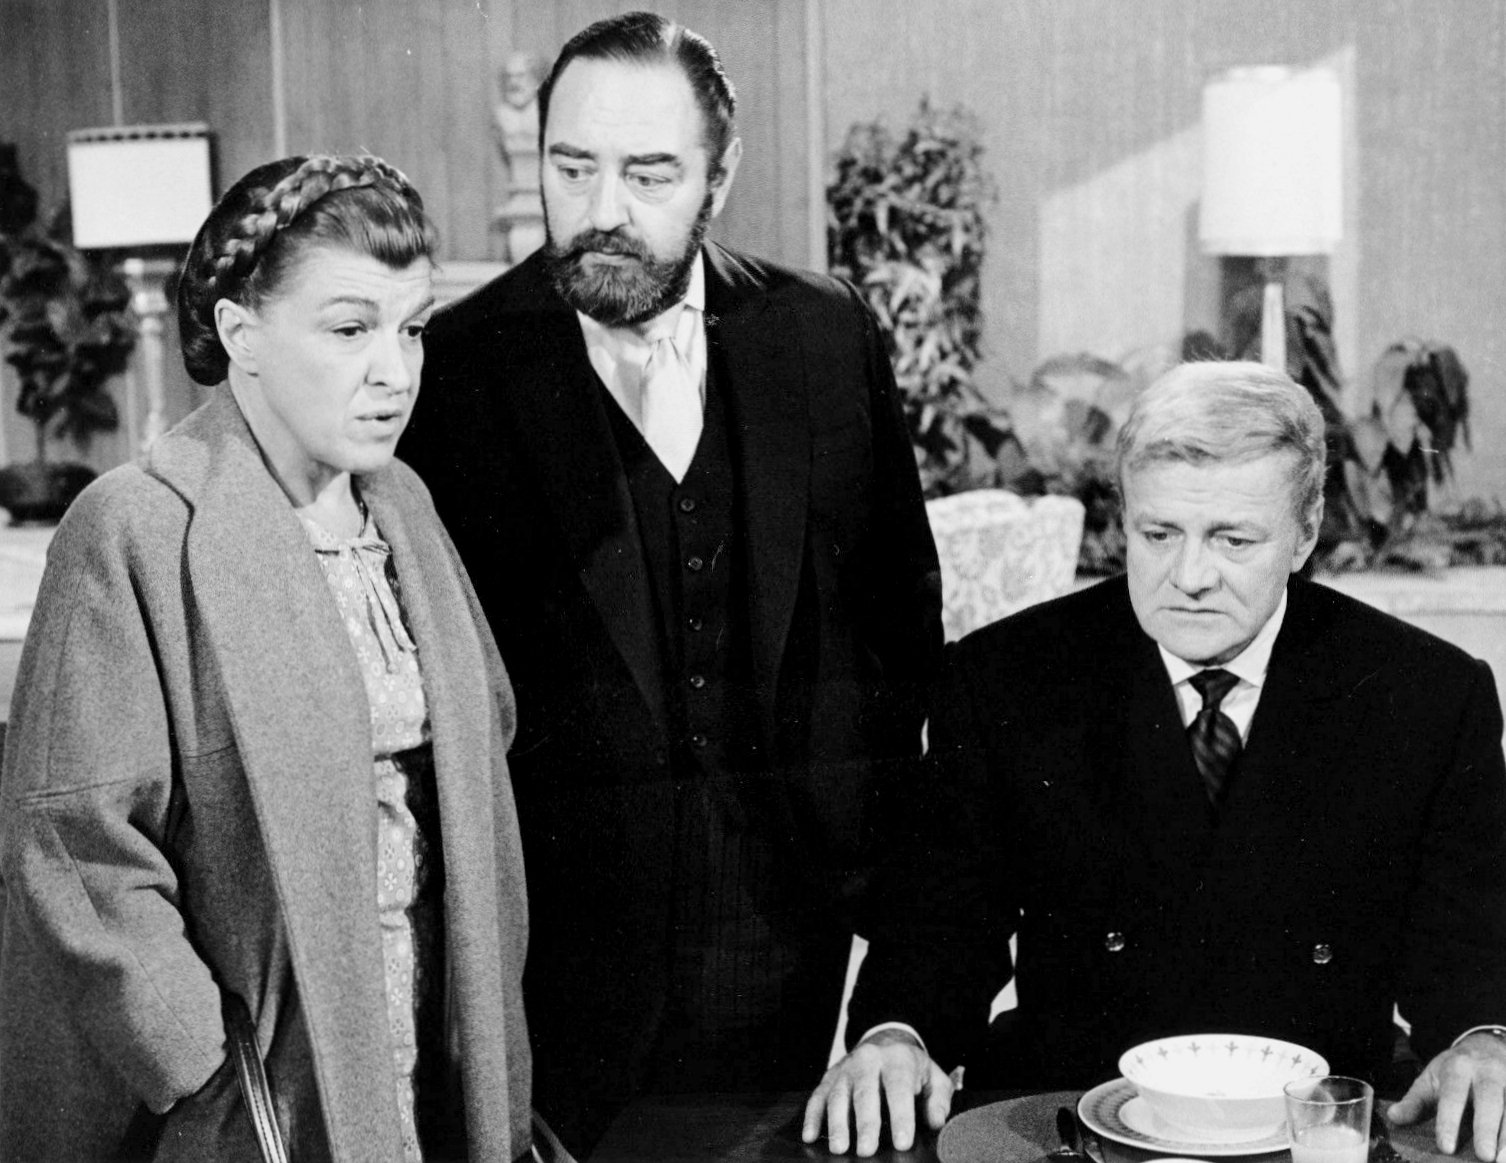 Actors Sebastian Cabot, Brian Keith and actress Nancy Walker in a 1970 promotional photograph for the CBS Television series Family Affair. | Source: Wikimedia Commons.